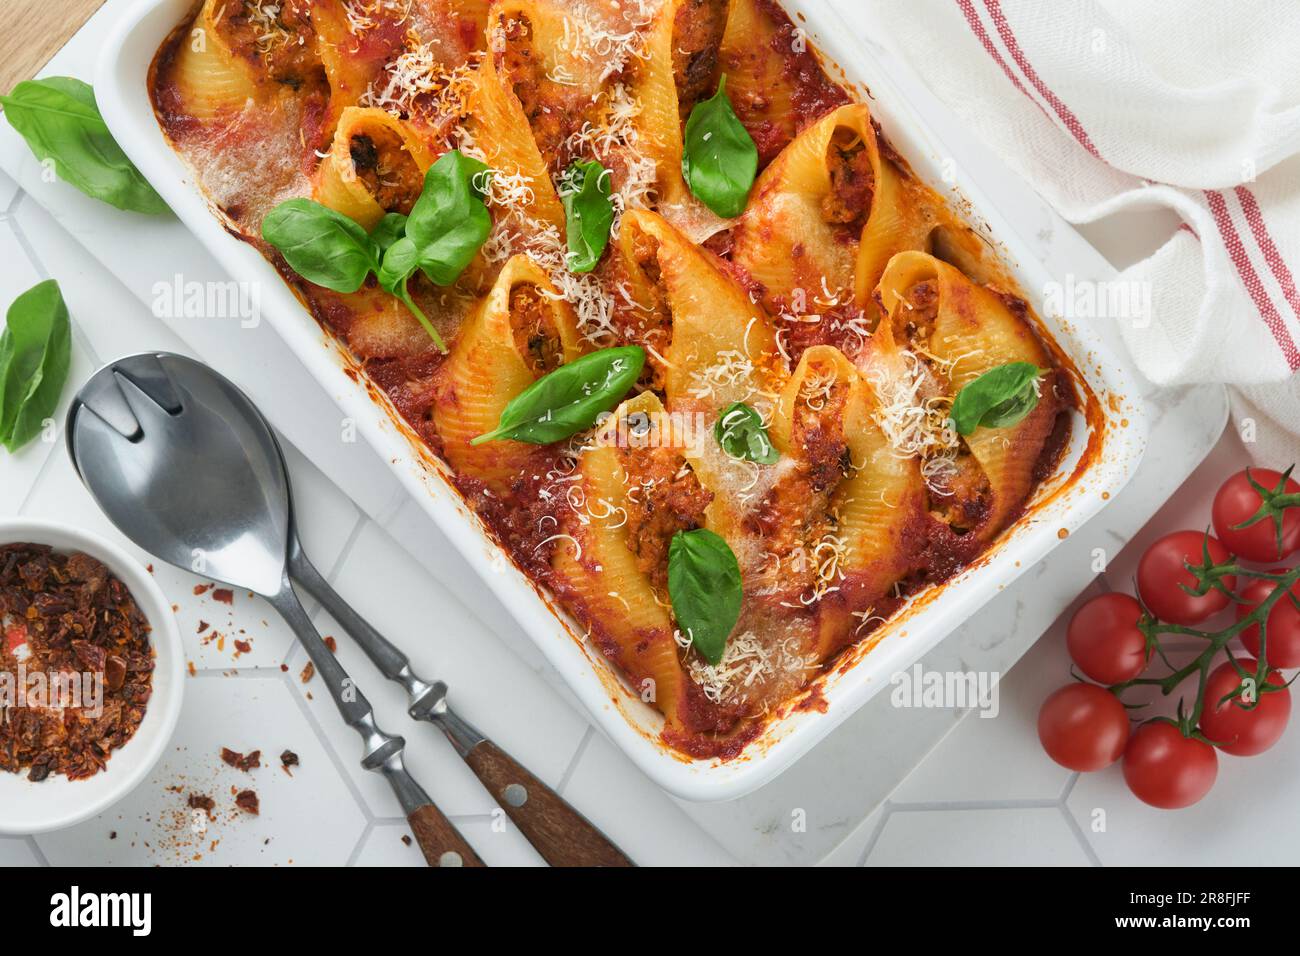 Cannelloni or conchiglioni. tile bolognese stuffed Alamy white Photo shells Italian on tomatoes, with meat bolo Traditional sauce, Stock modern Baked basil - table. pasta